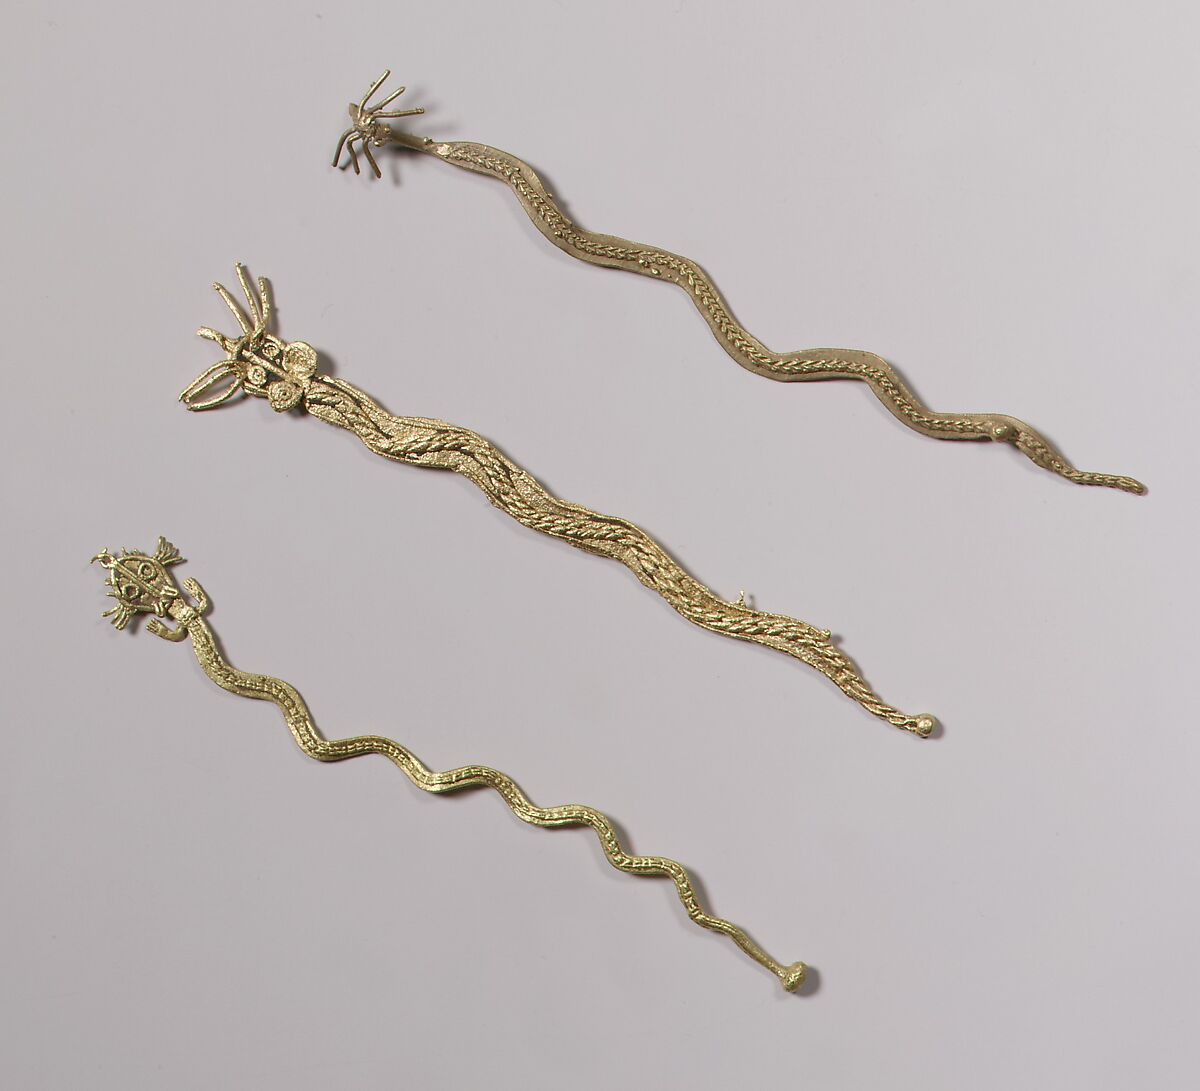 Three Serpents (Tunjos), Gold, Muisca 